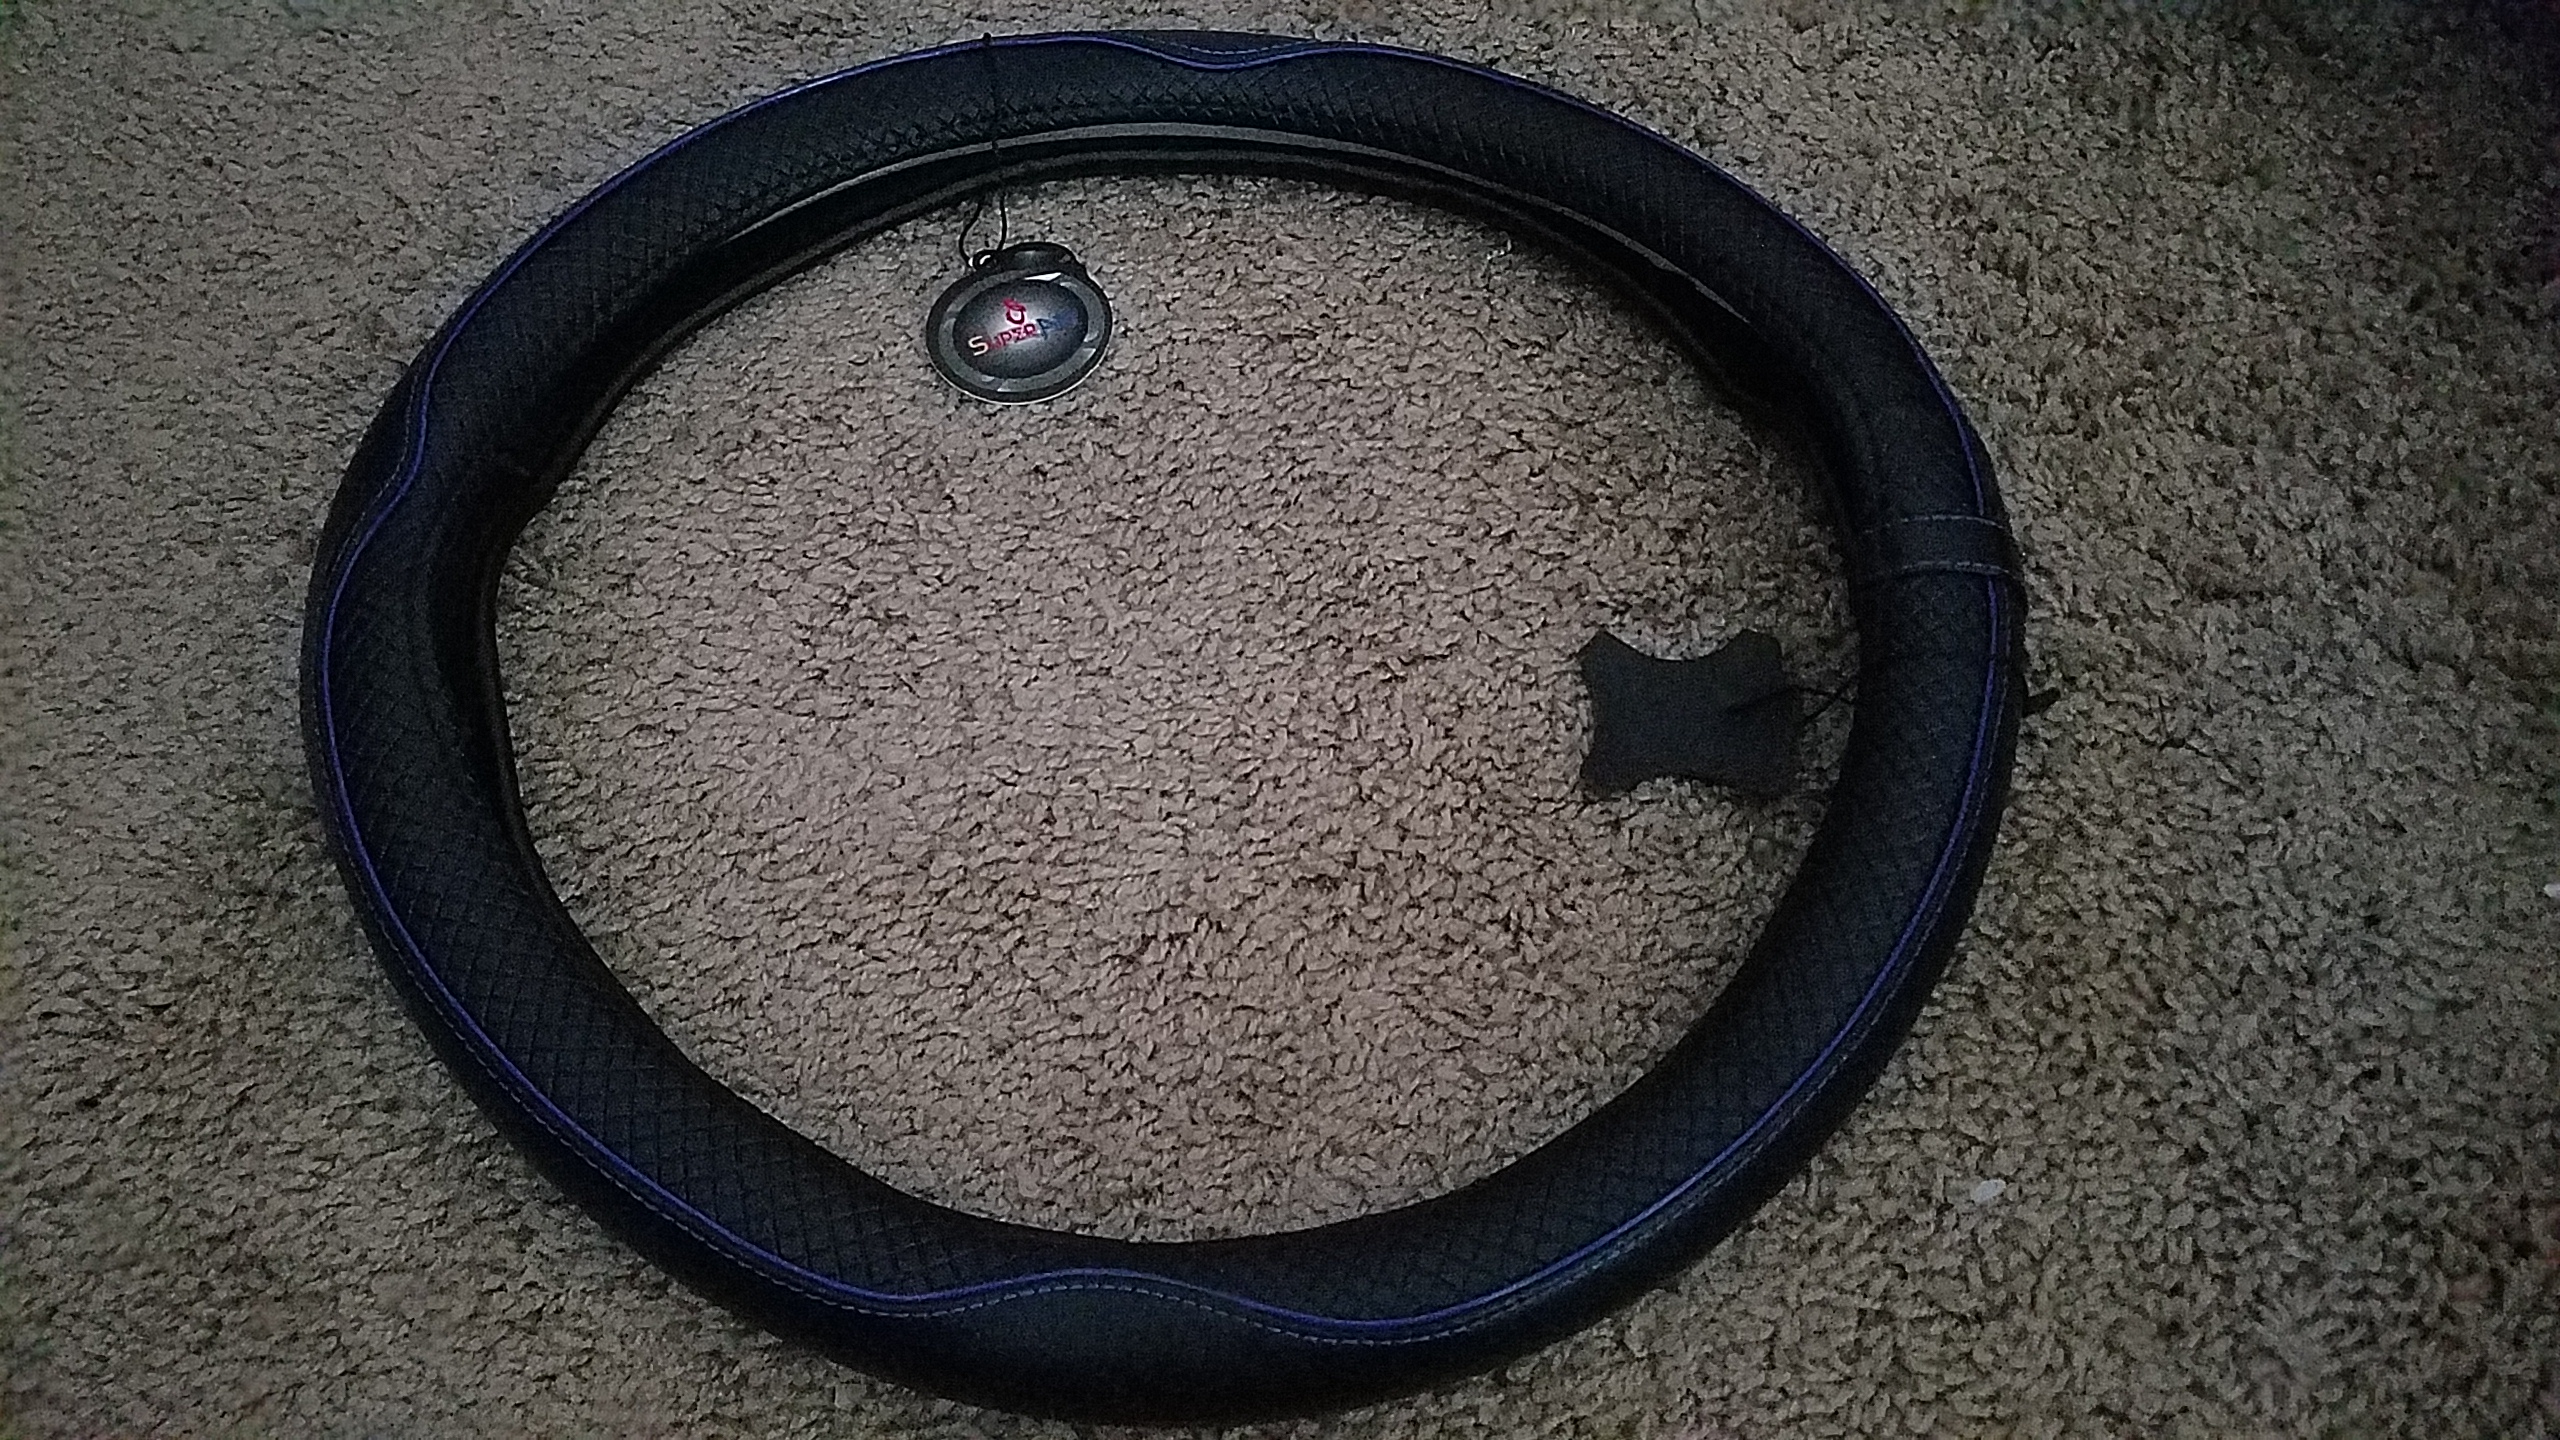 This steering wheel cover is ideal to enhance the appearance or worn out steering wheels!